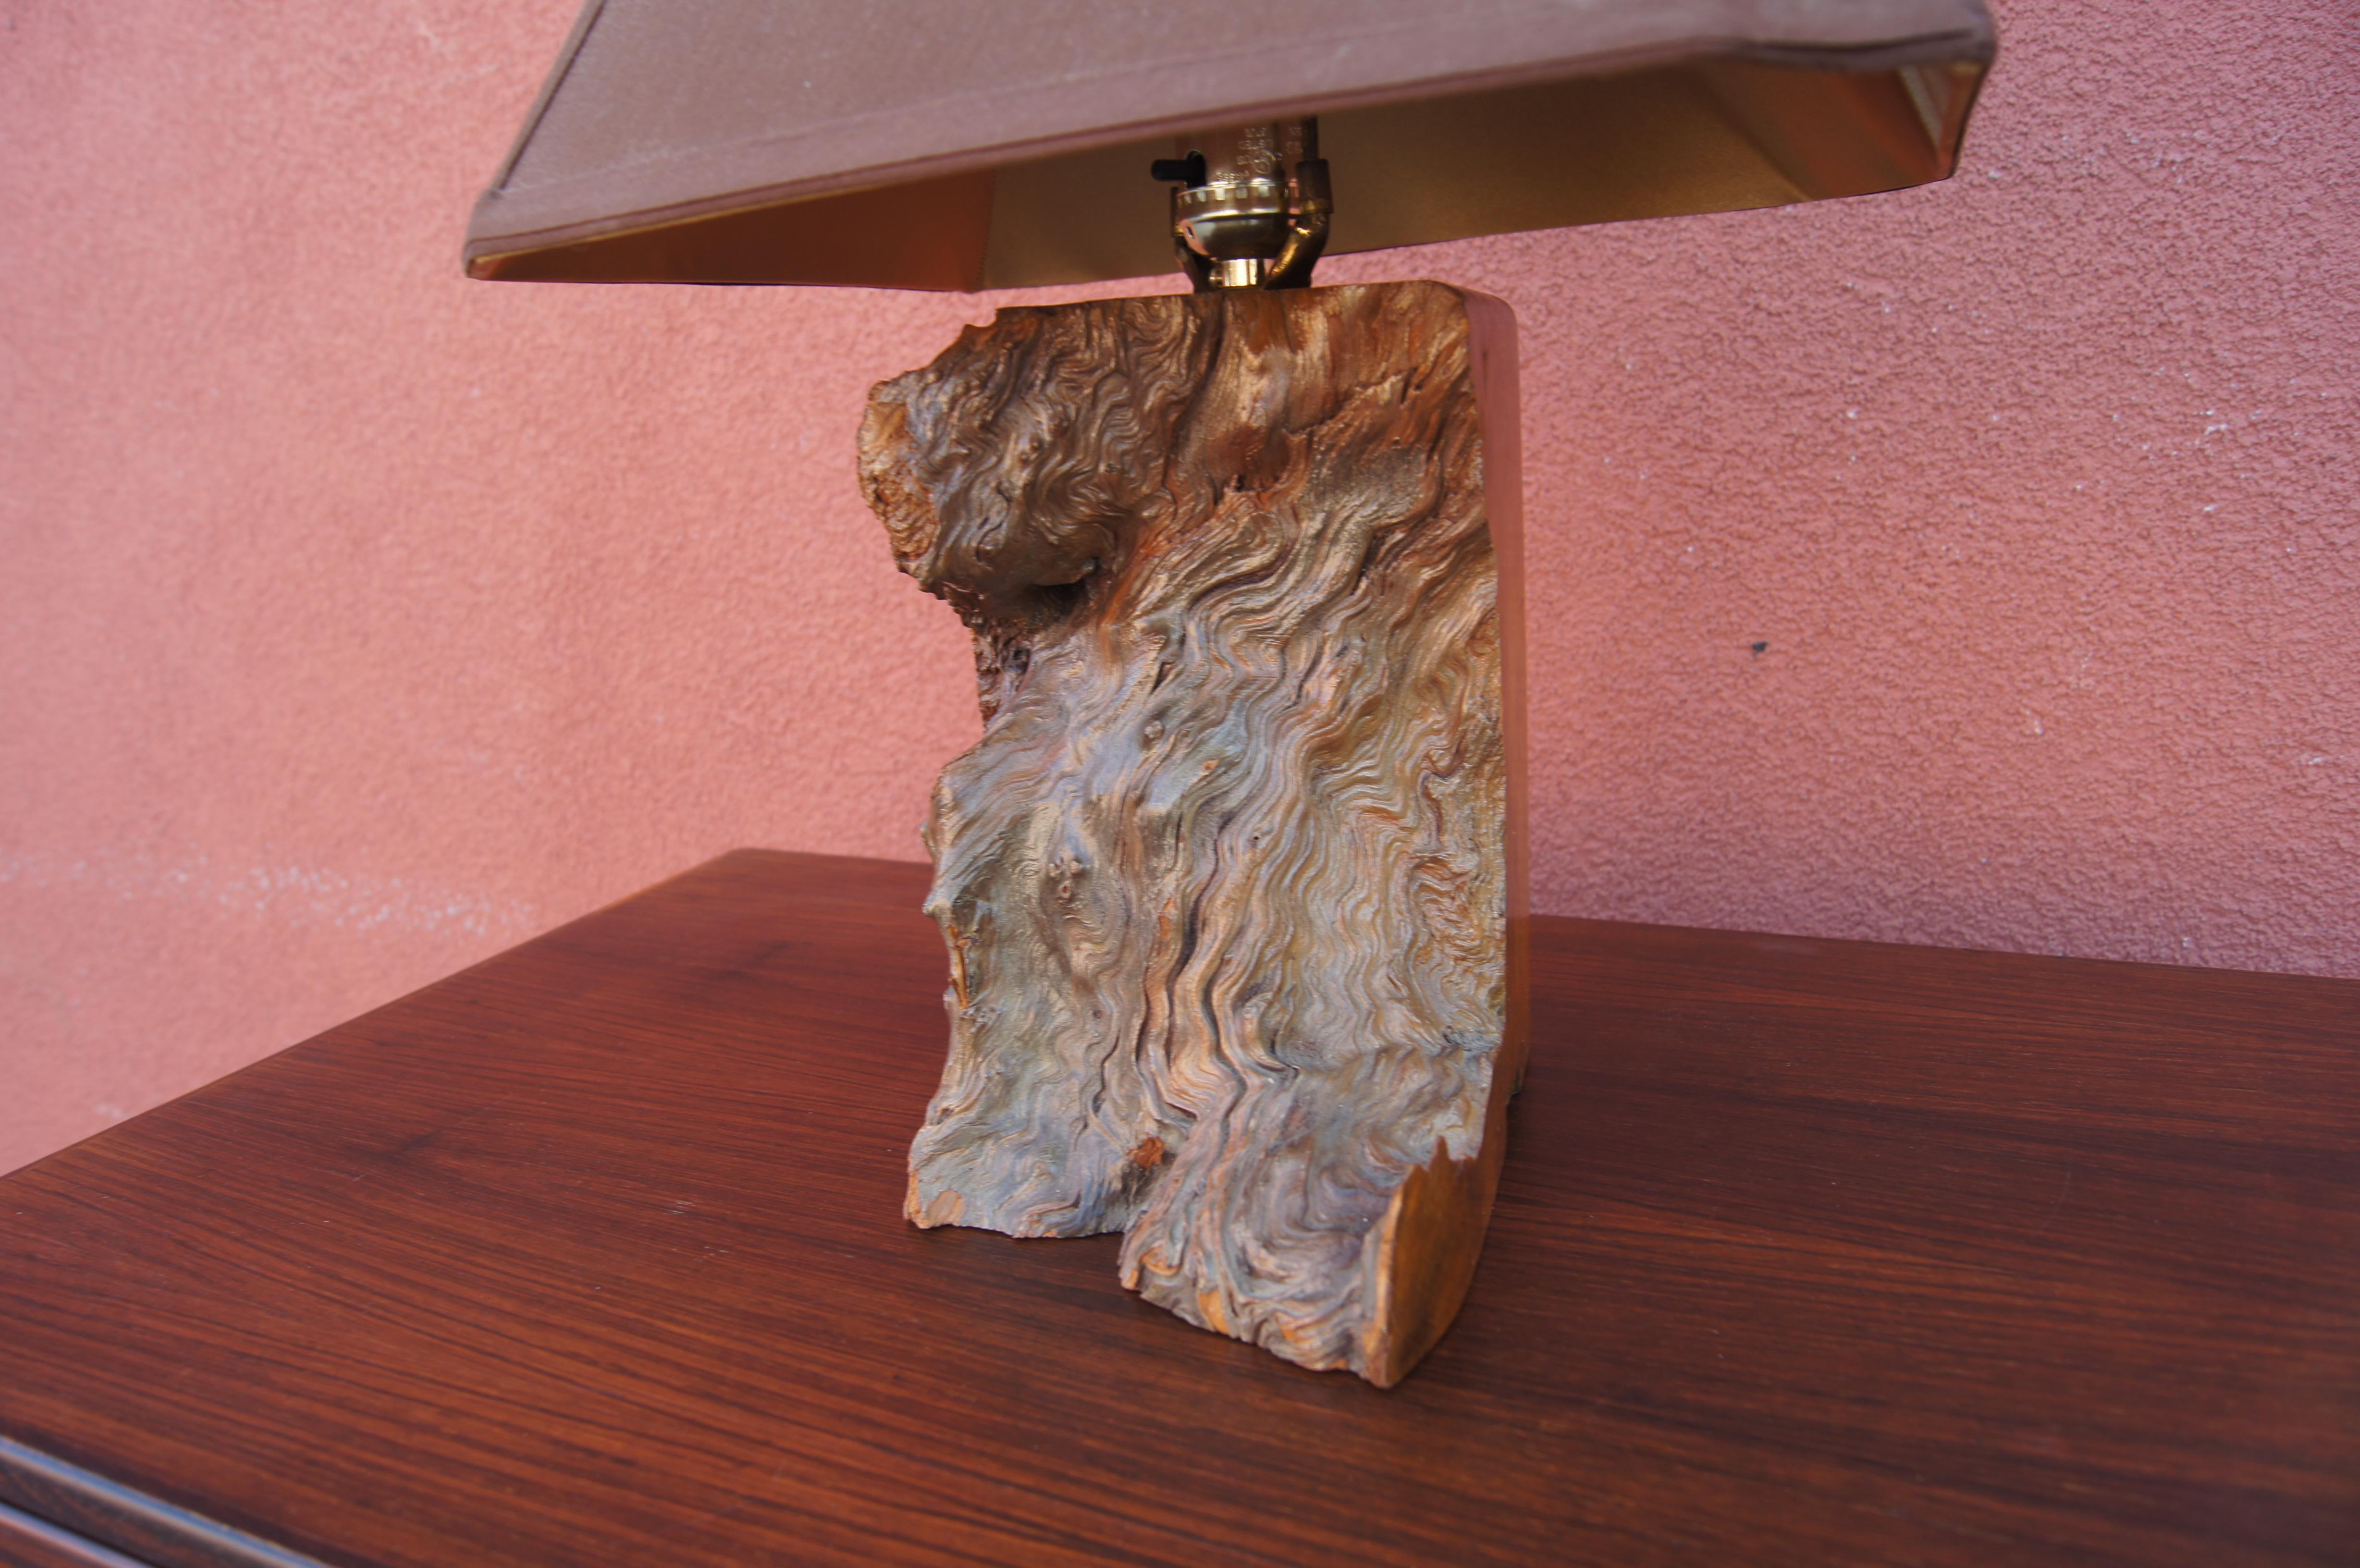 This striking midcentury table lamp has a base of walnut burl that features both polished and live edges, creating complexity of form and hue. The lamp retains its original brown pagoda shade.

Measurement below is to the top of finial.